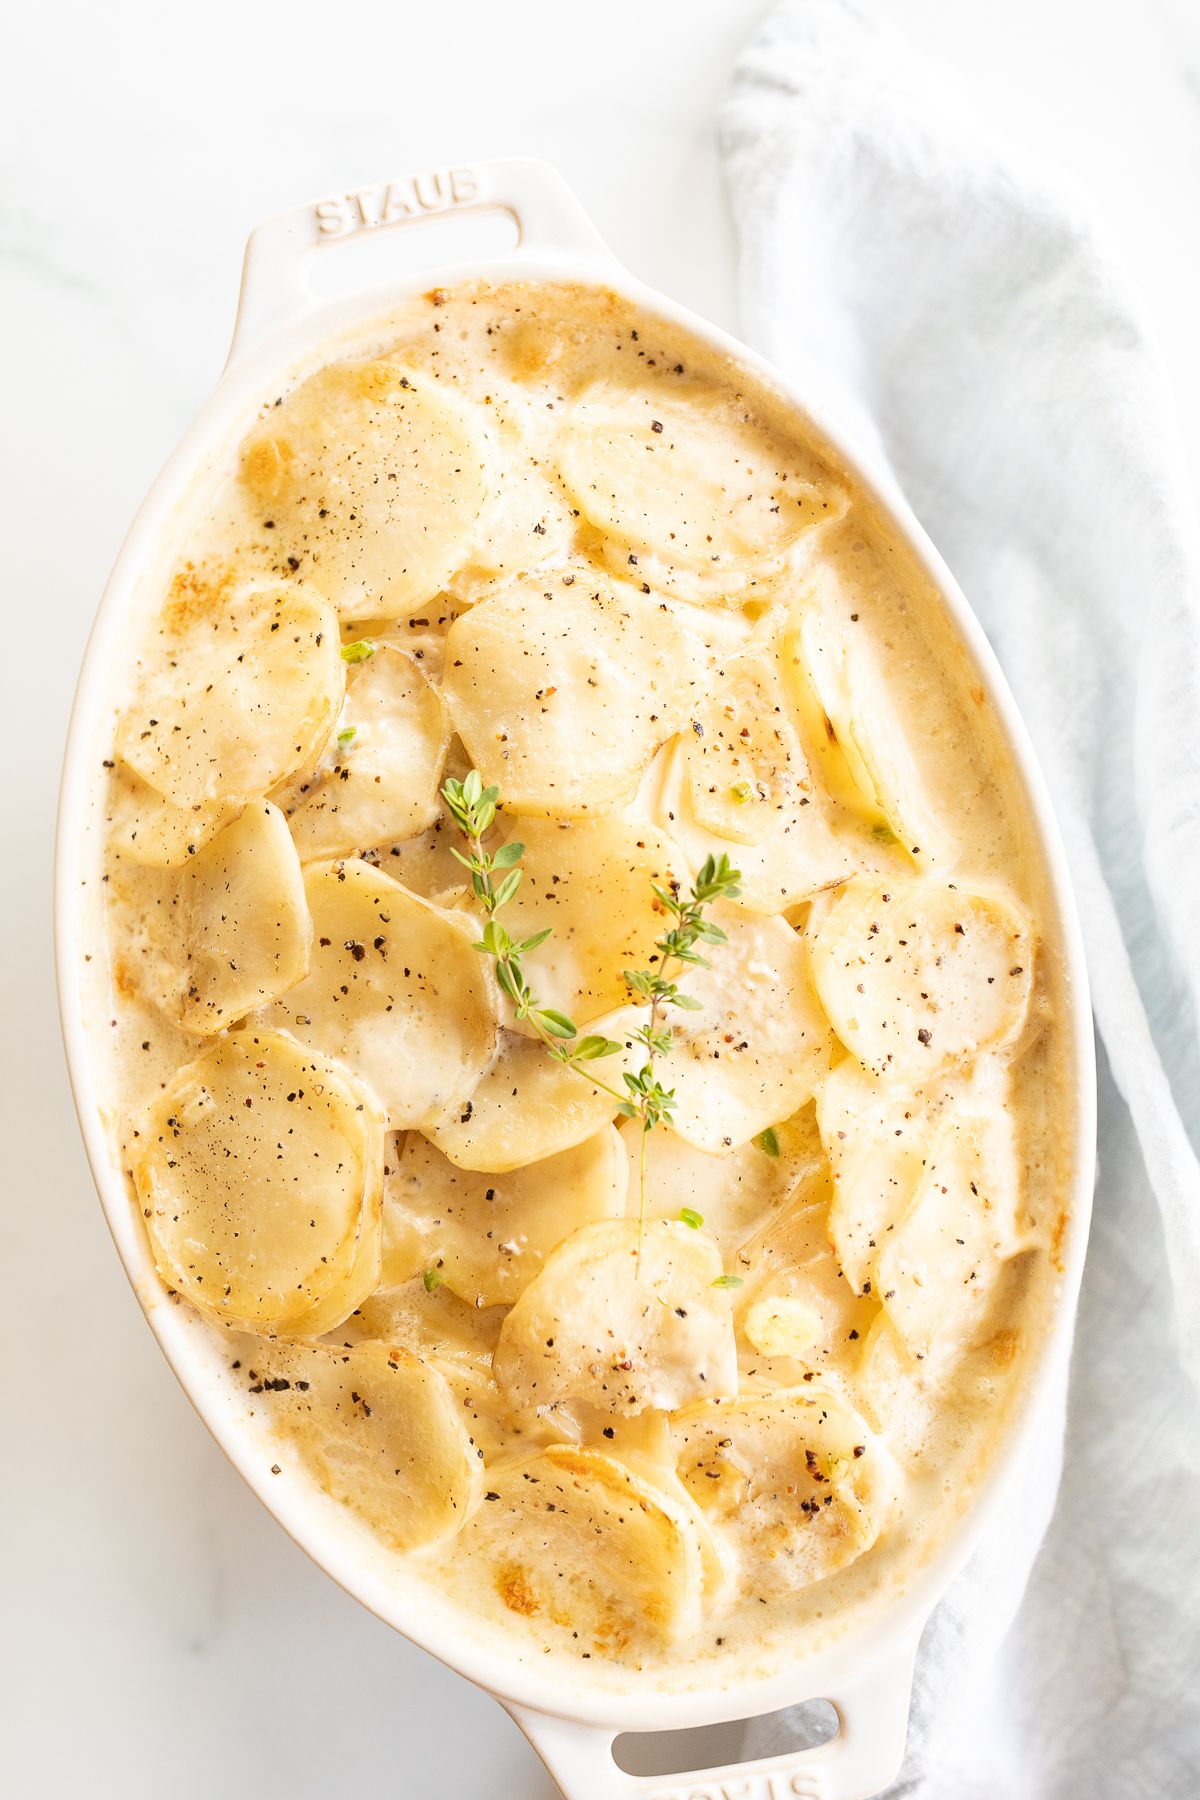 Gratin Dauphinoise potatoes in a white oval baking dish, garnished with fresh thyme.